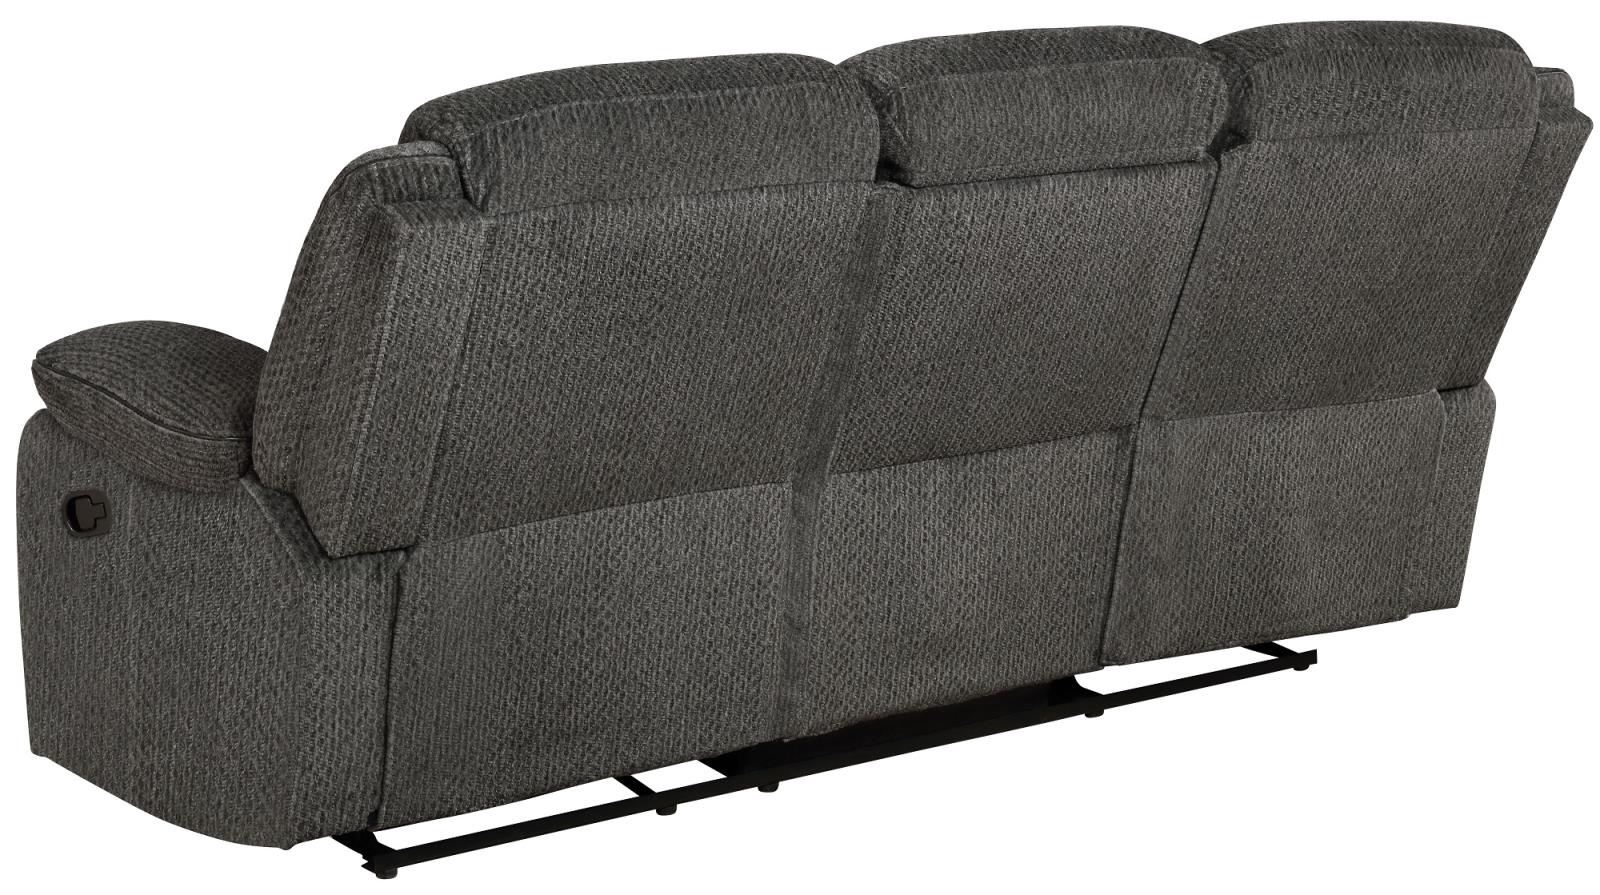 Jennings Upholstered Motion Sofa with Drop-down Table Charcoal - What A Room